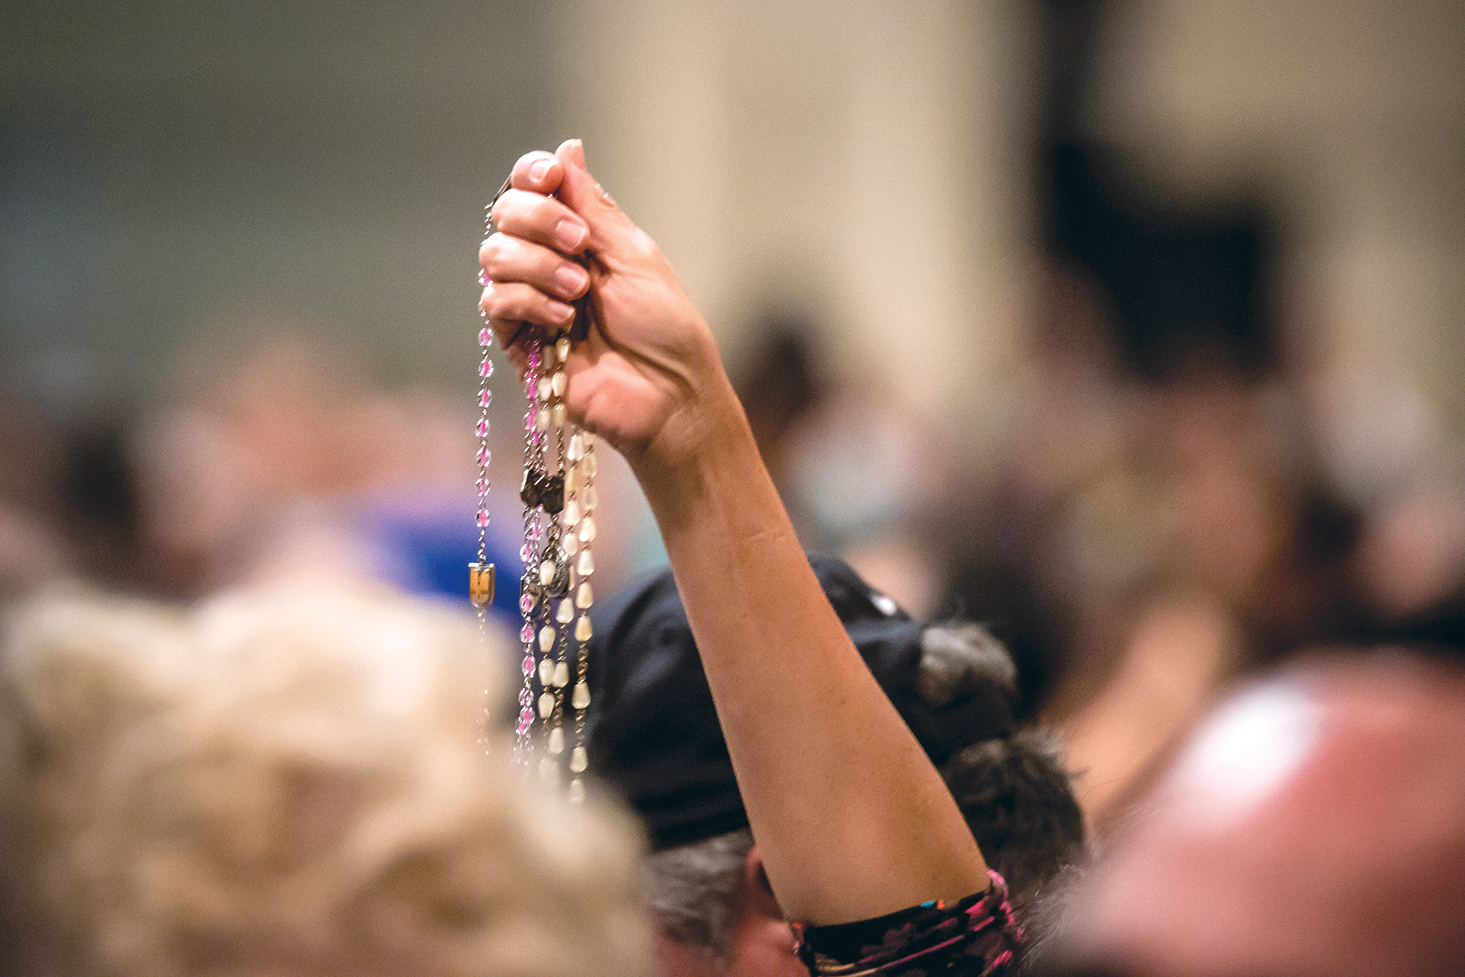 A woman holds up her rosaries to be blessed at the 40th annual Rosary Celebration held Sunday, Oct. 25 at the Phoenix Convention Center.